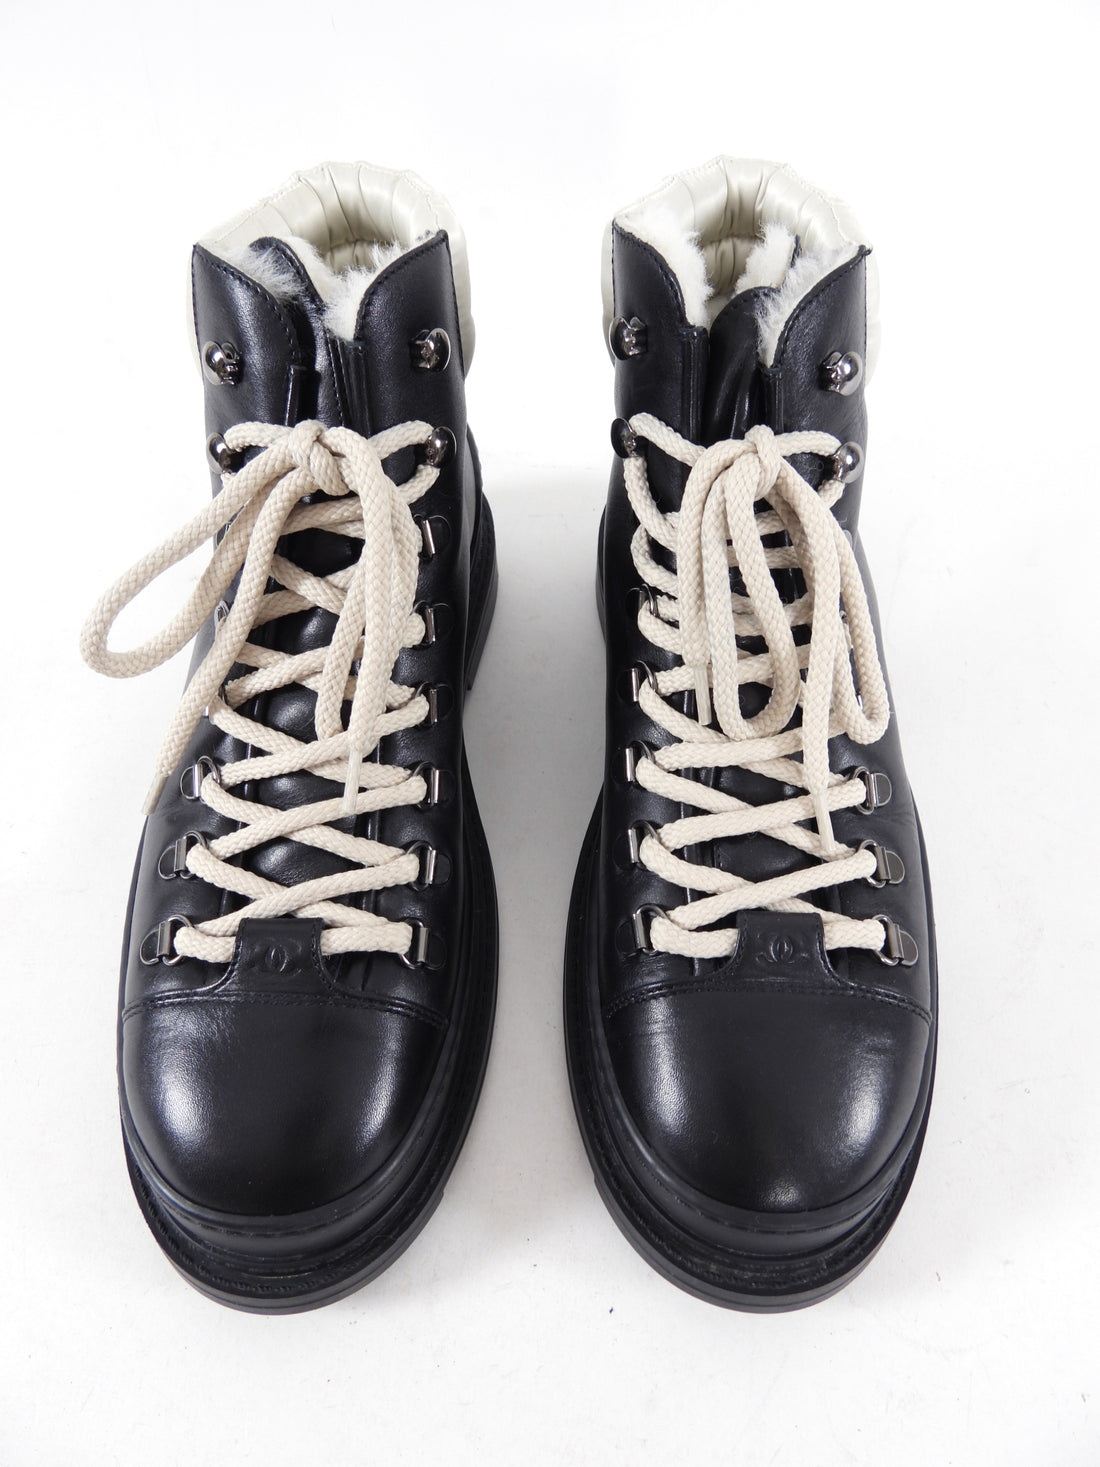 Chanel Black Leather Lace Up Winter Mountain Ankle Boots - 38.5 / 8